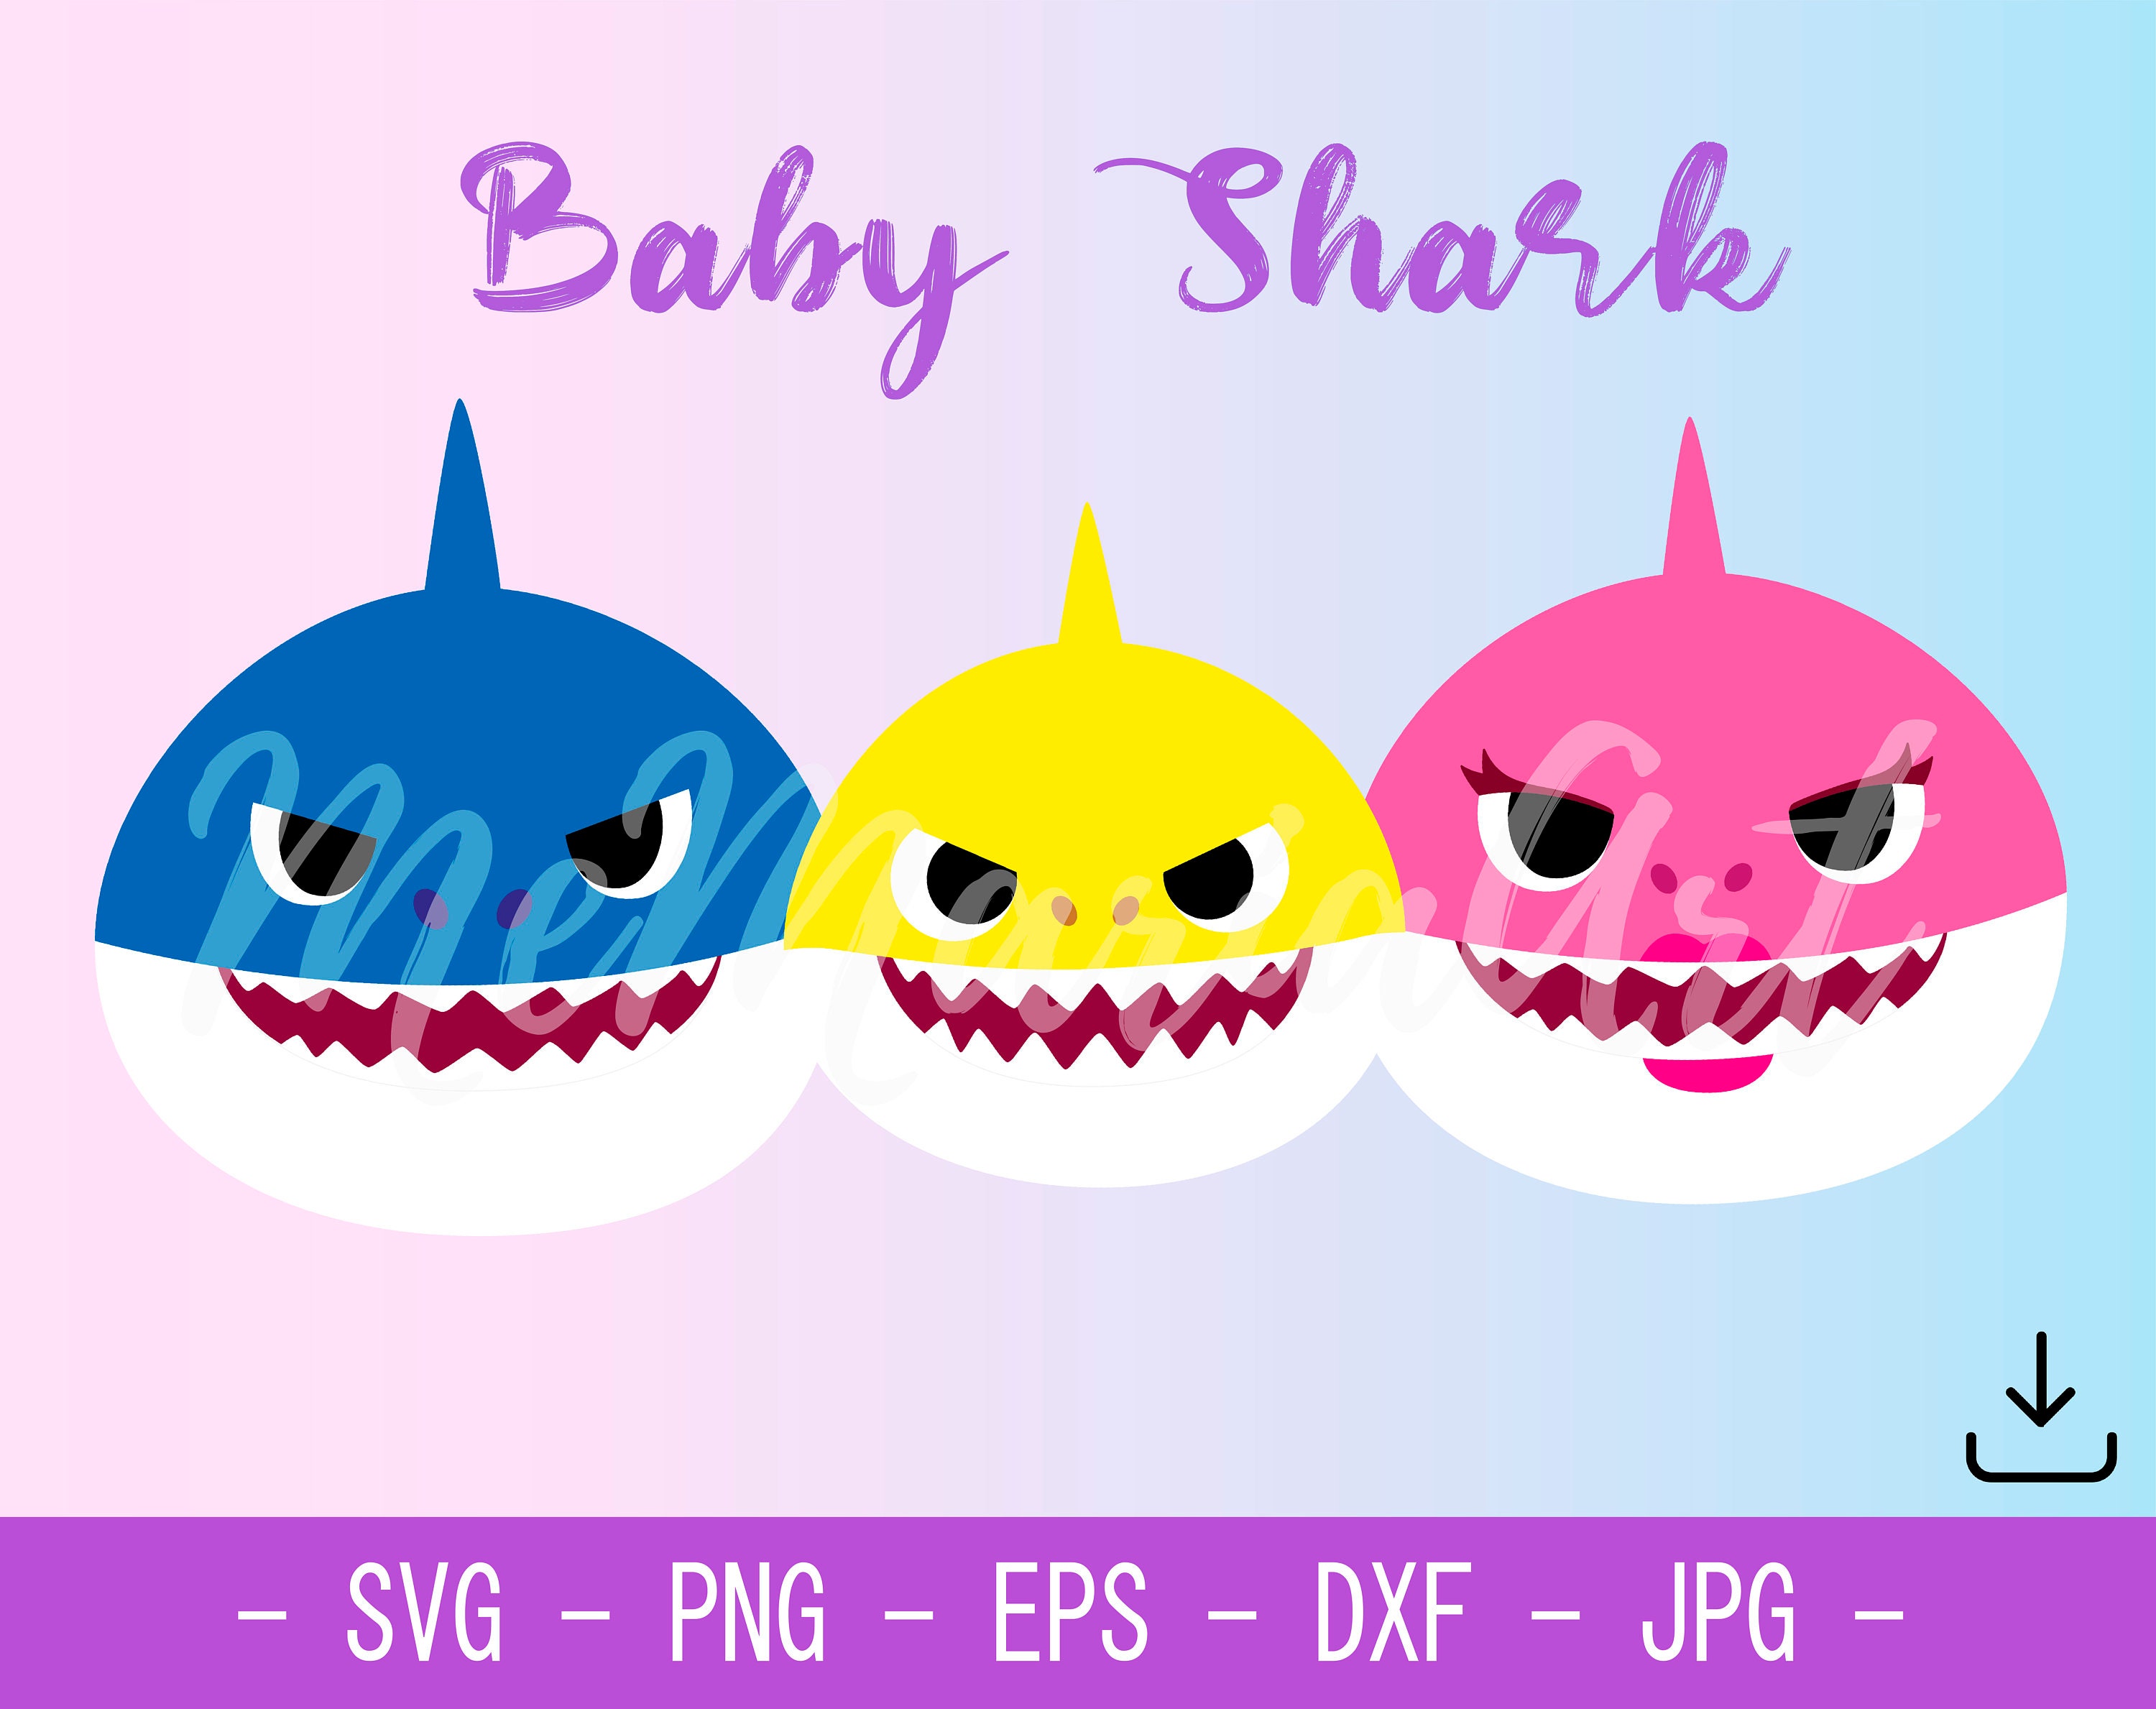 Download Angry Shark Family Svg Baby Shark Family Svg file for ...